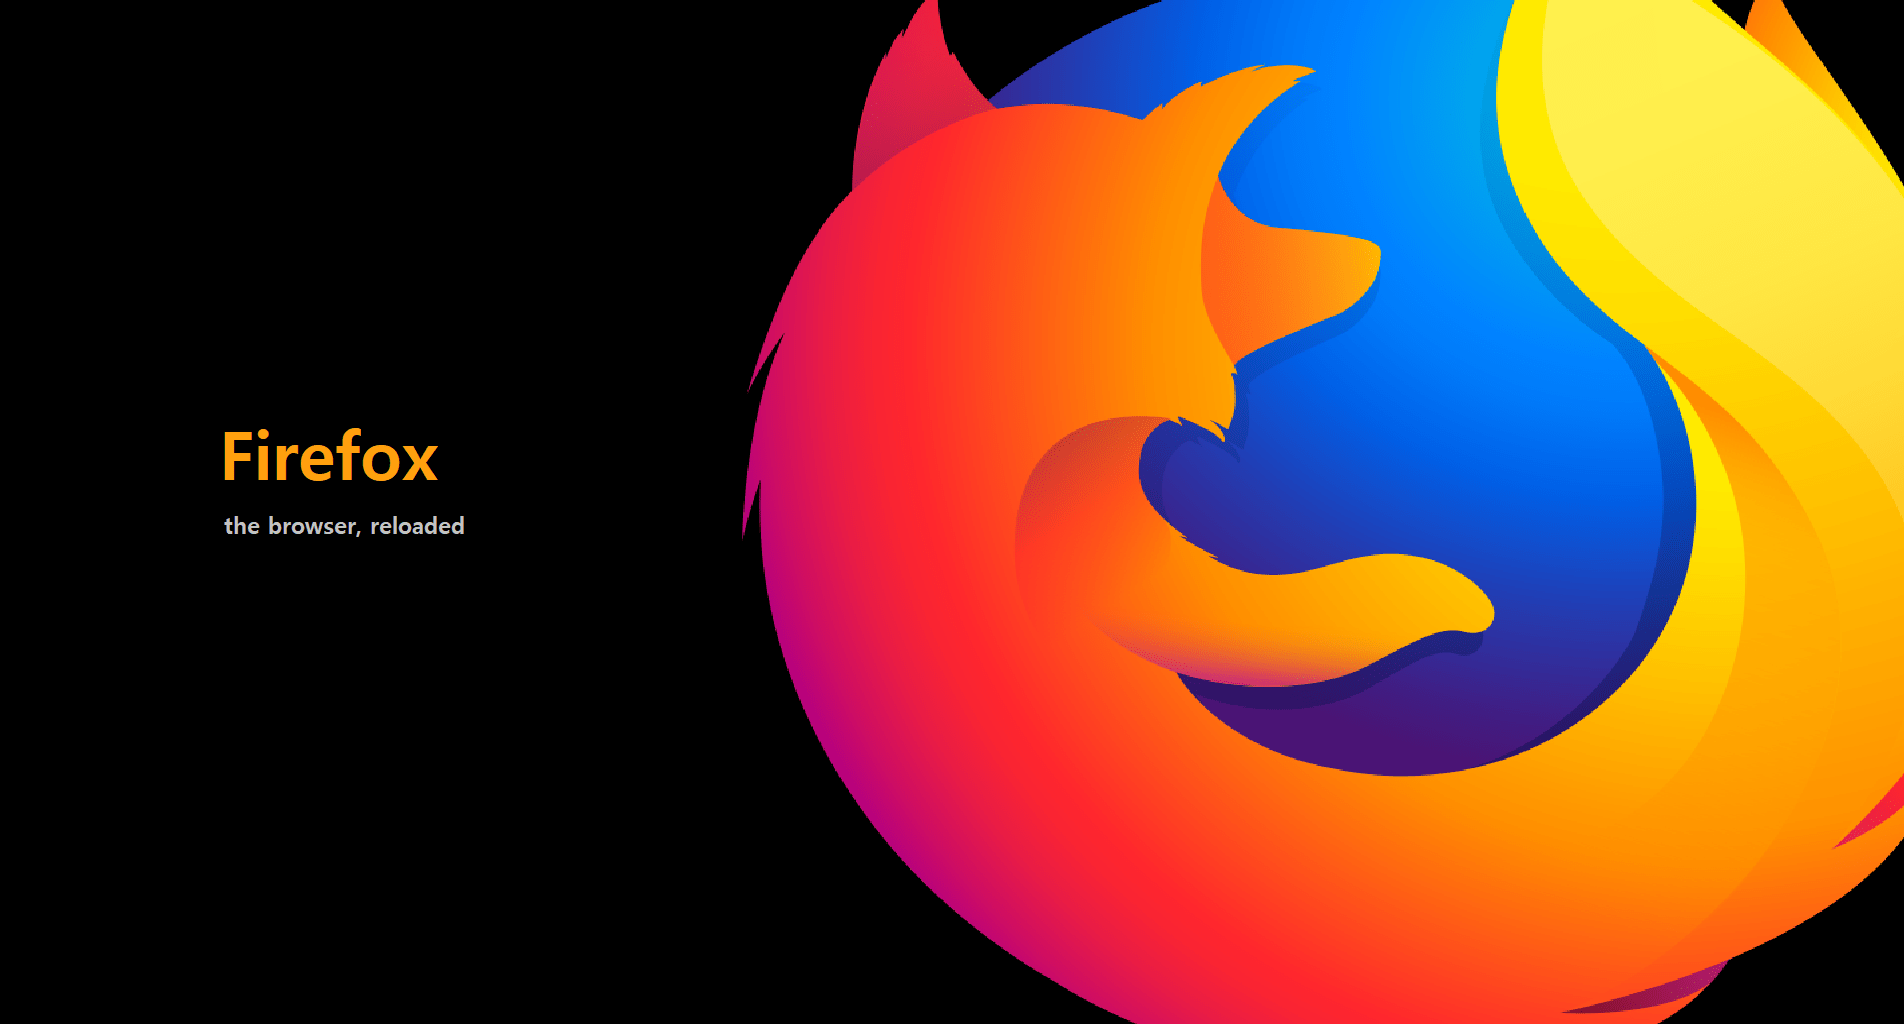 Wallpaper ID 796719  orange color animal themes globe  man made  object space sphere getting logo closeup communication Mozilla  Firefox blue colored background free download